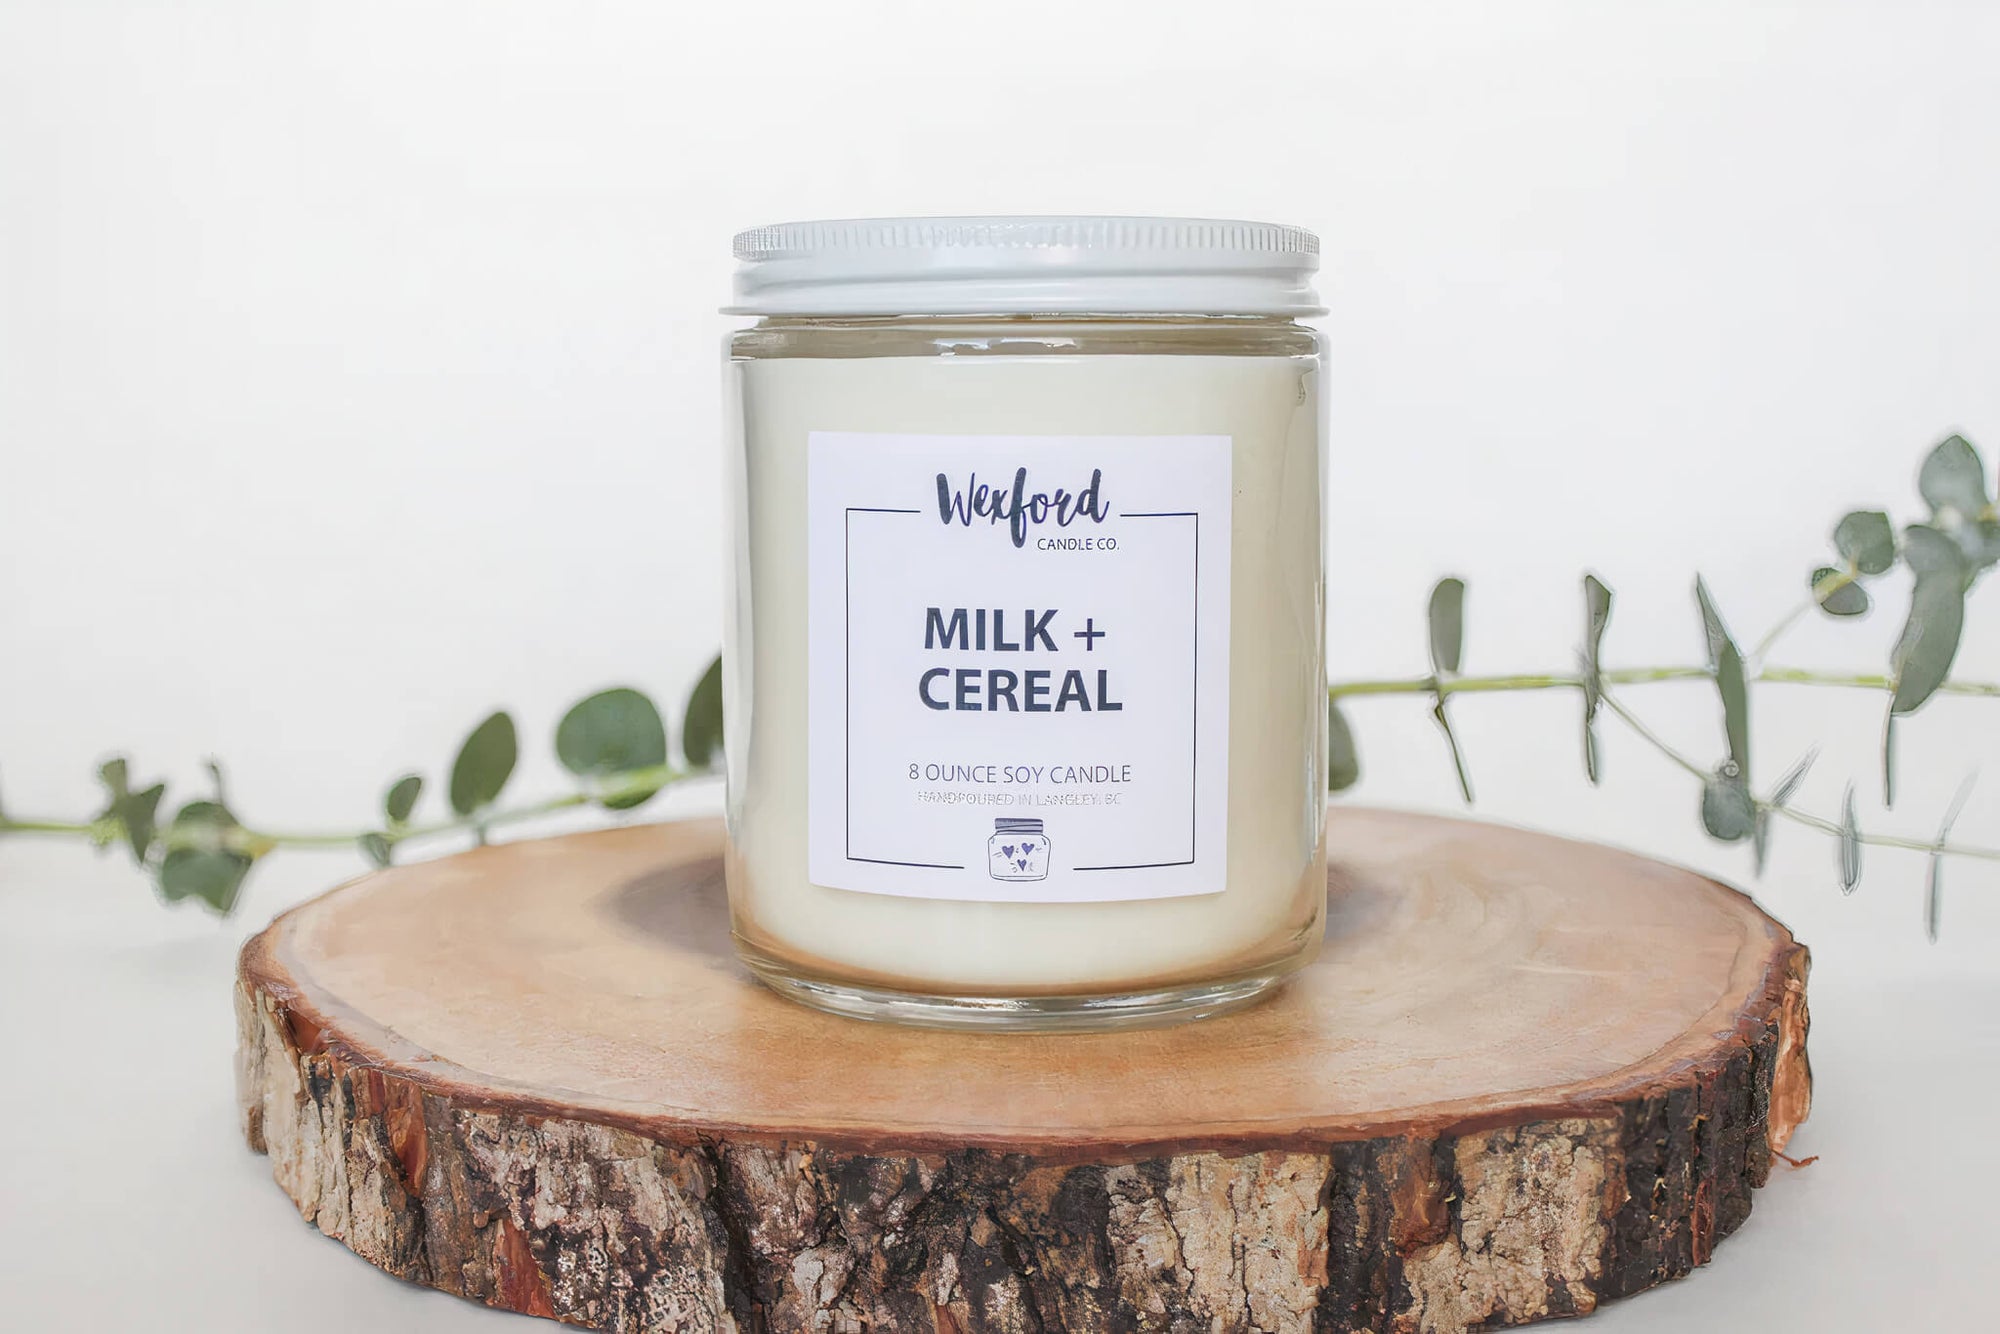 Wexford Candle co. | Milk & Cereal